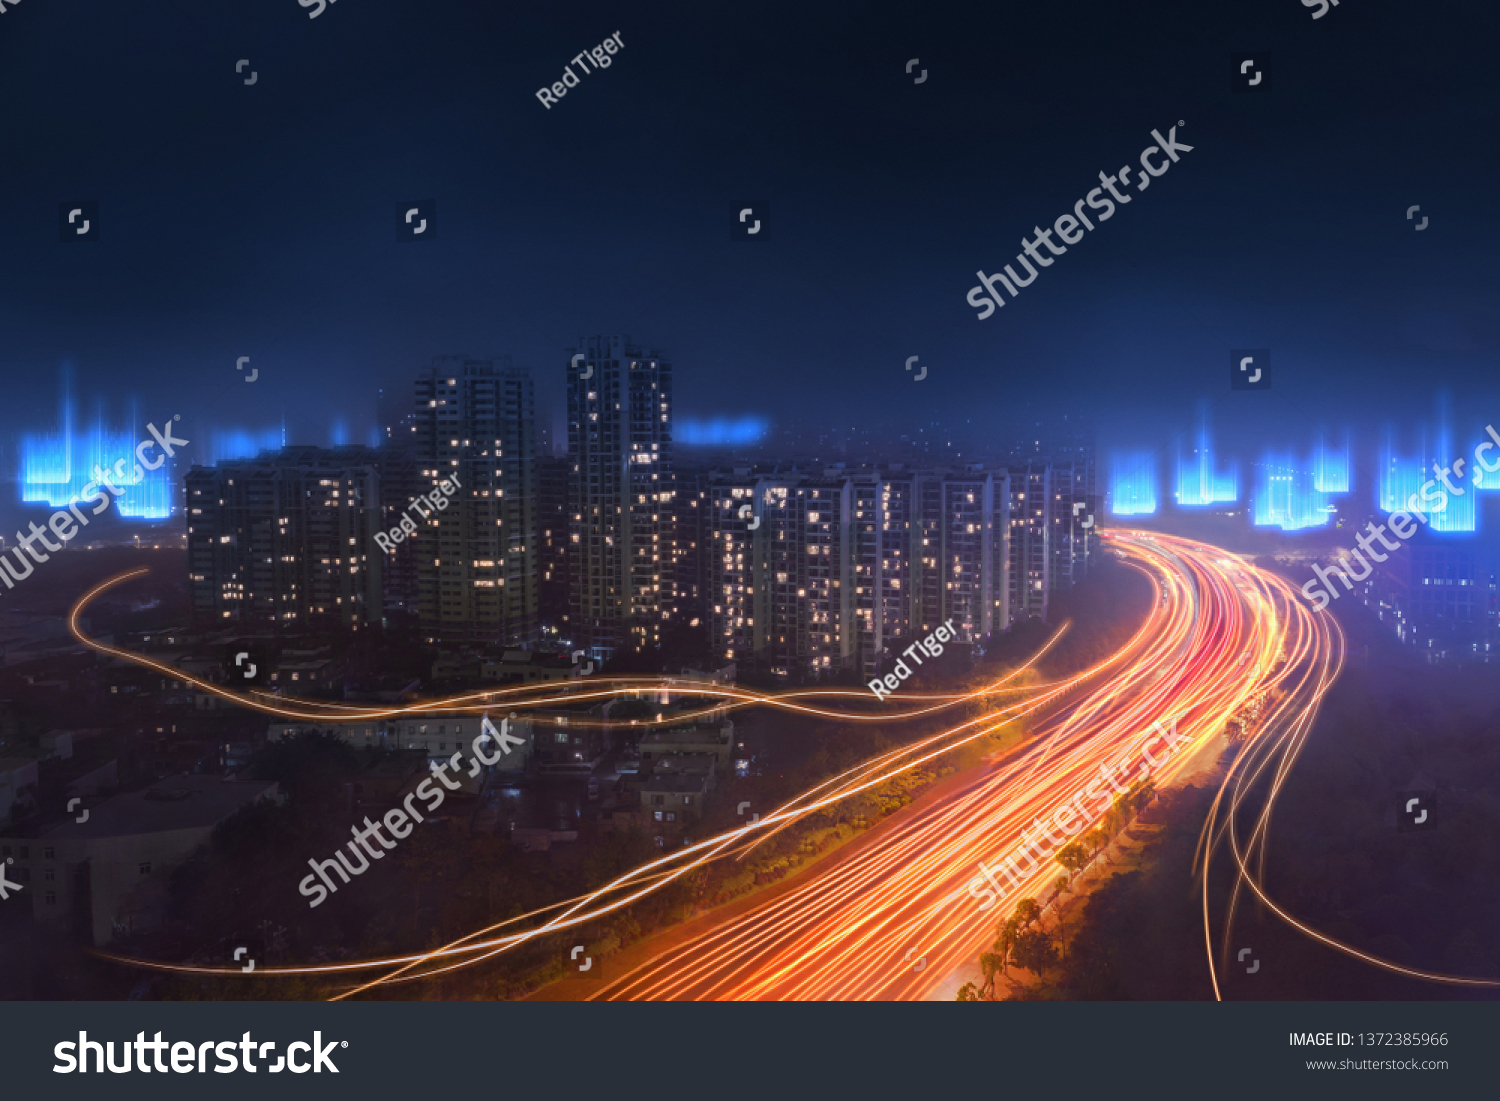 digital modern city with high speed fiber network coverage, abstract futuristic concept of big data technology  #1372385966